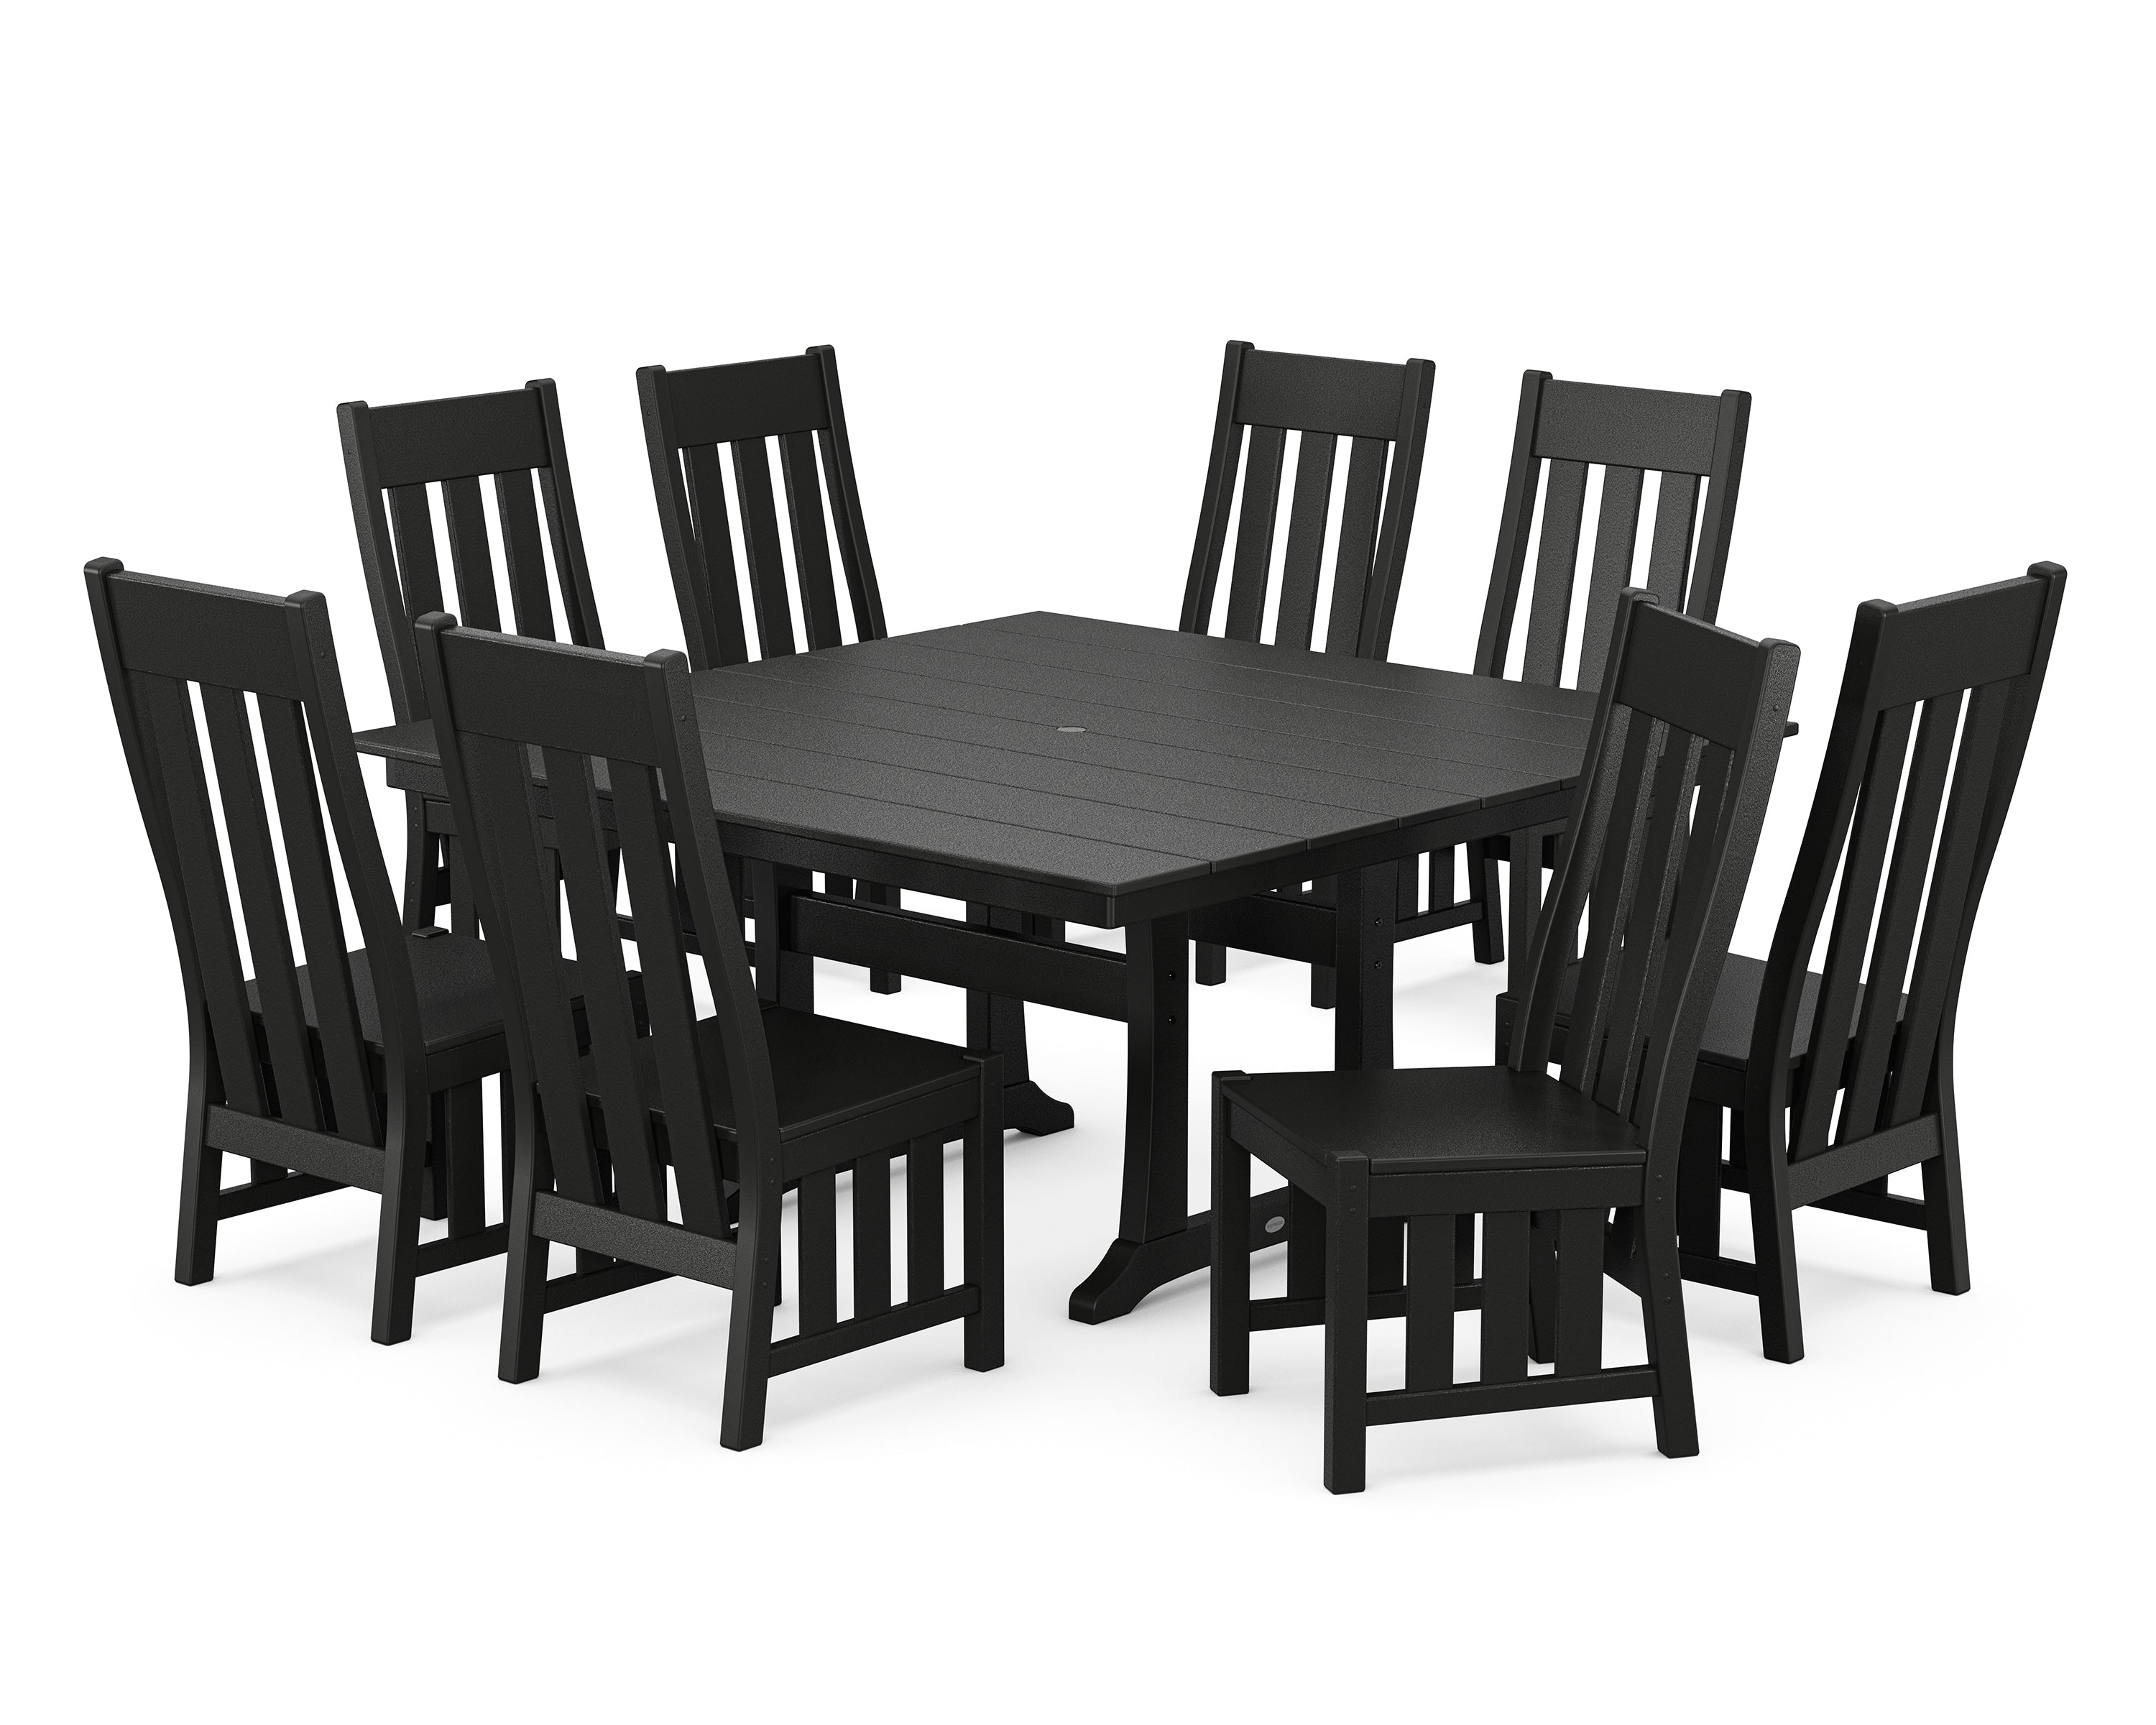 Martha Stewart by POLYWOOD® Acadia Side Chair 9-Piece Square Farmhouse Dining Set with Trestle Legs in Black